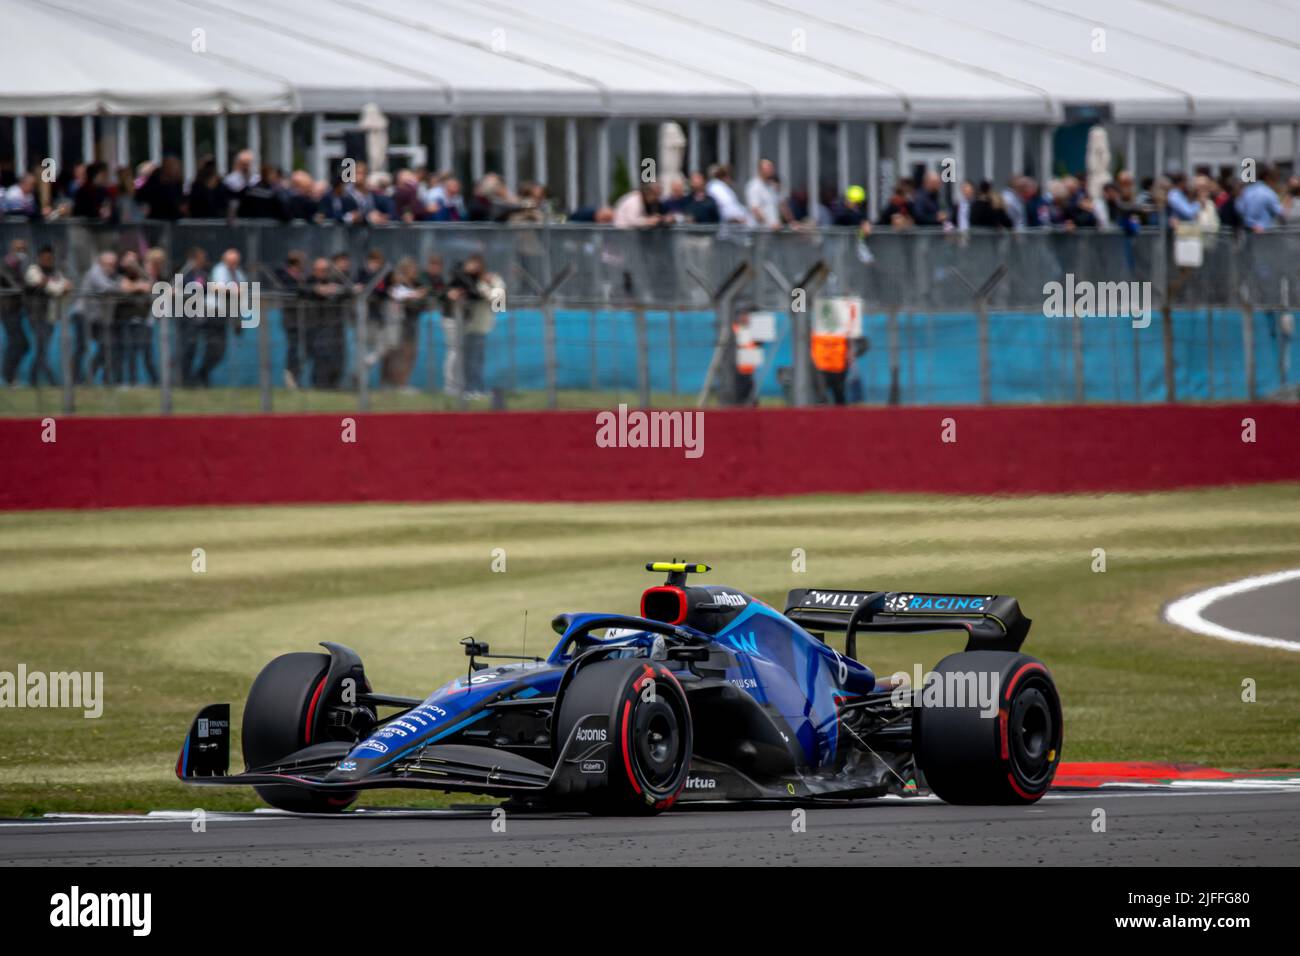 SILVERSTONE, UNITED KINGDOM - July 02, 2022: Nicholas Latifi, from Canada competes for Williams Racing. Qualifying, round 10 of the 2022 F1 championship. Credit: Michael Potts/Alamy Live News Stock Photo